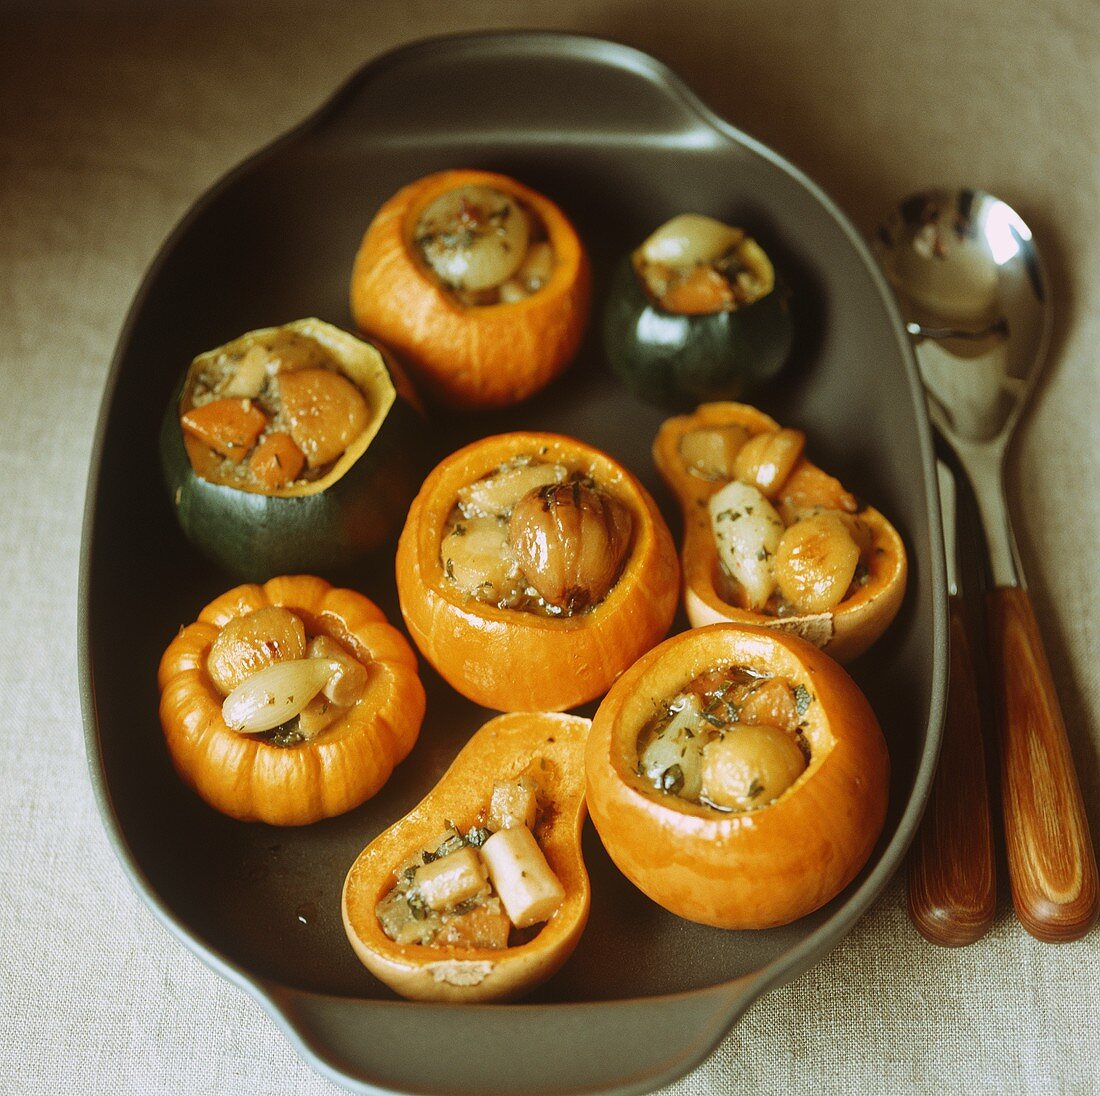 Pumpkins stuffed with shallots and chestnuts